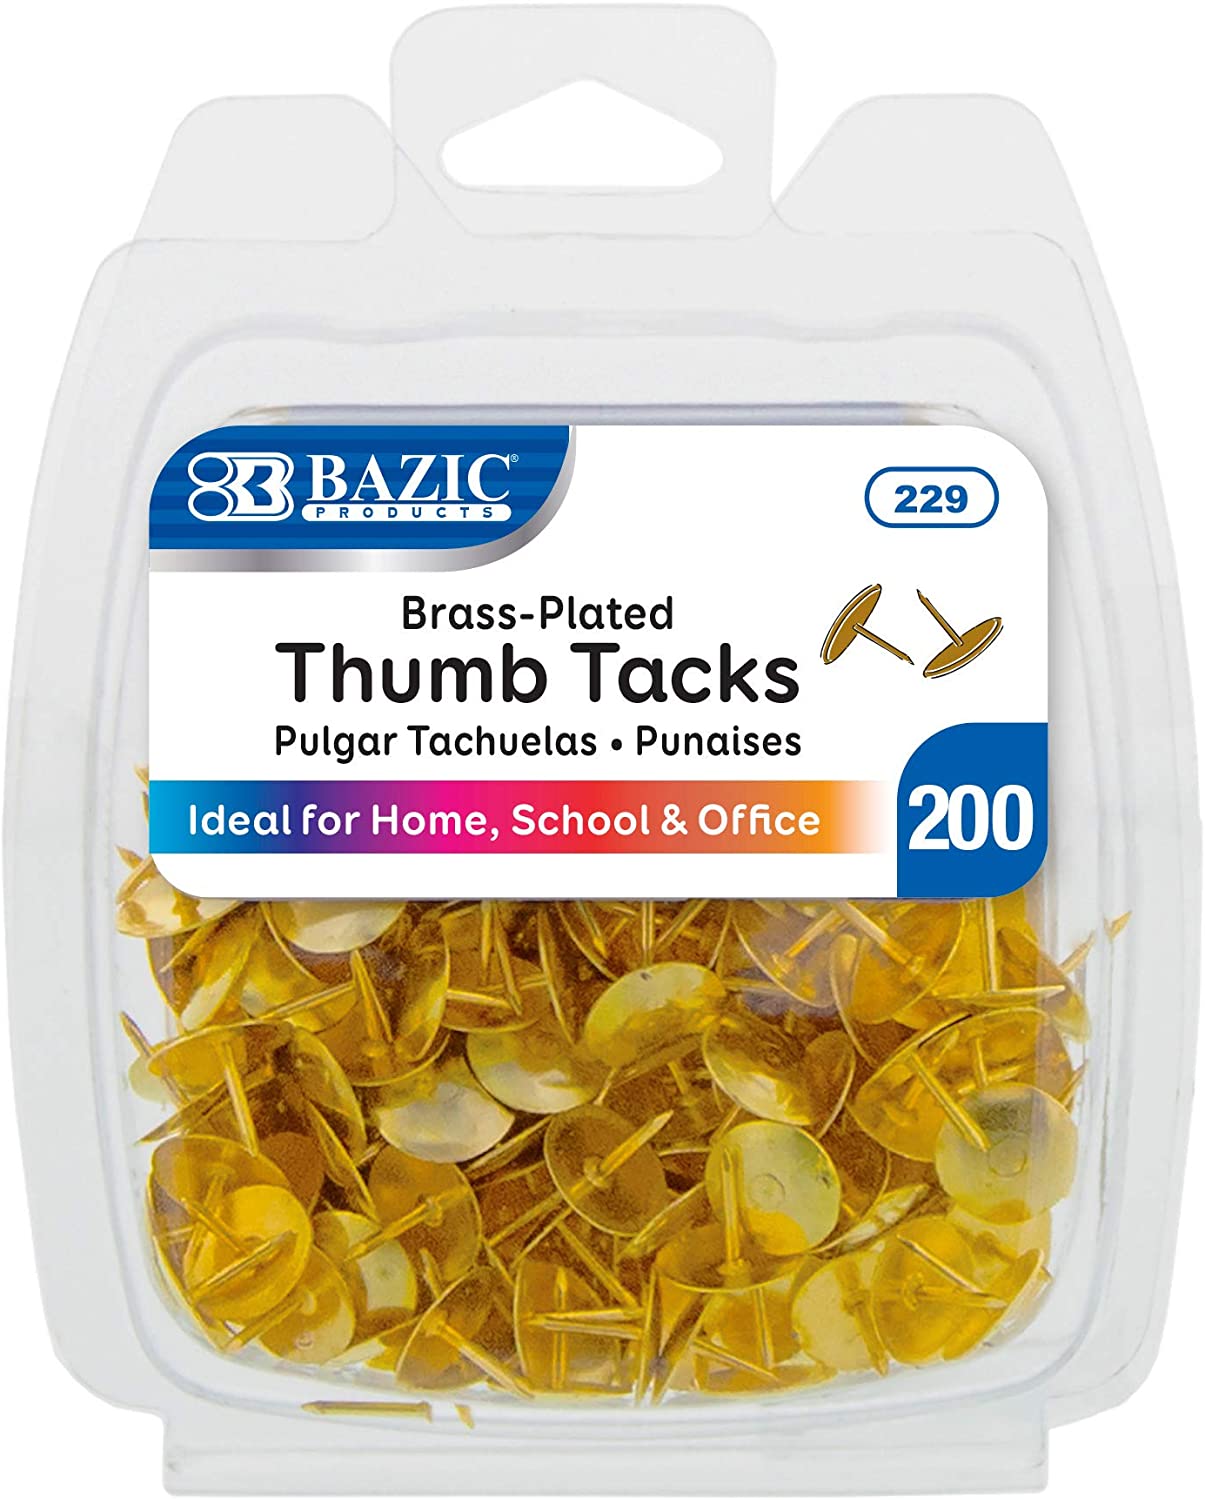 BAZIC Gold Metallic Push Pins Thumb Tacks, 3/8 Inch Flat Head Steel Metal Push Pin Thumbtack Sharp Points for Cork Bulletin Board Posters Craft Picture Office Home School (200/Pack), 1-Pack.